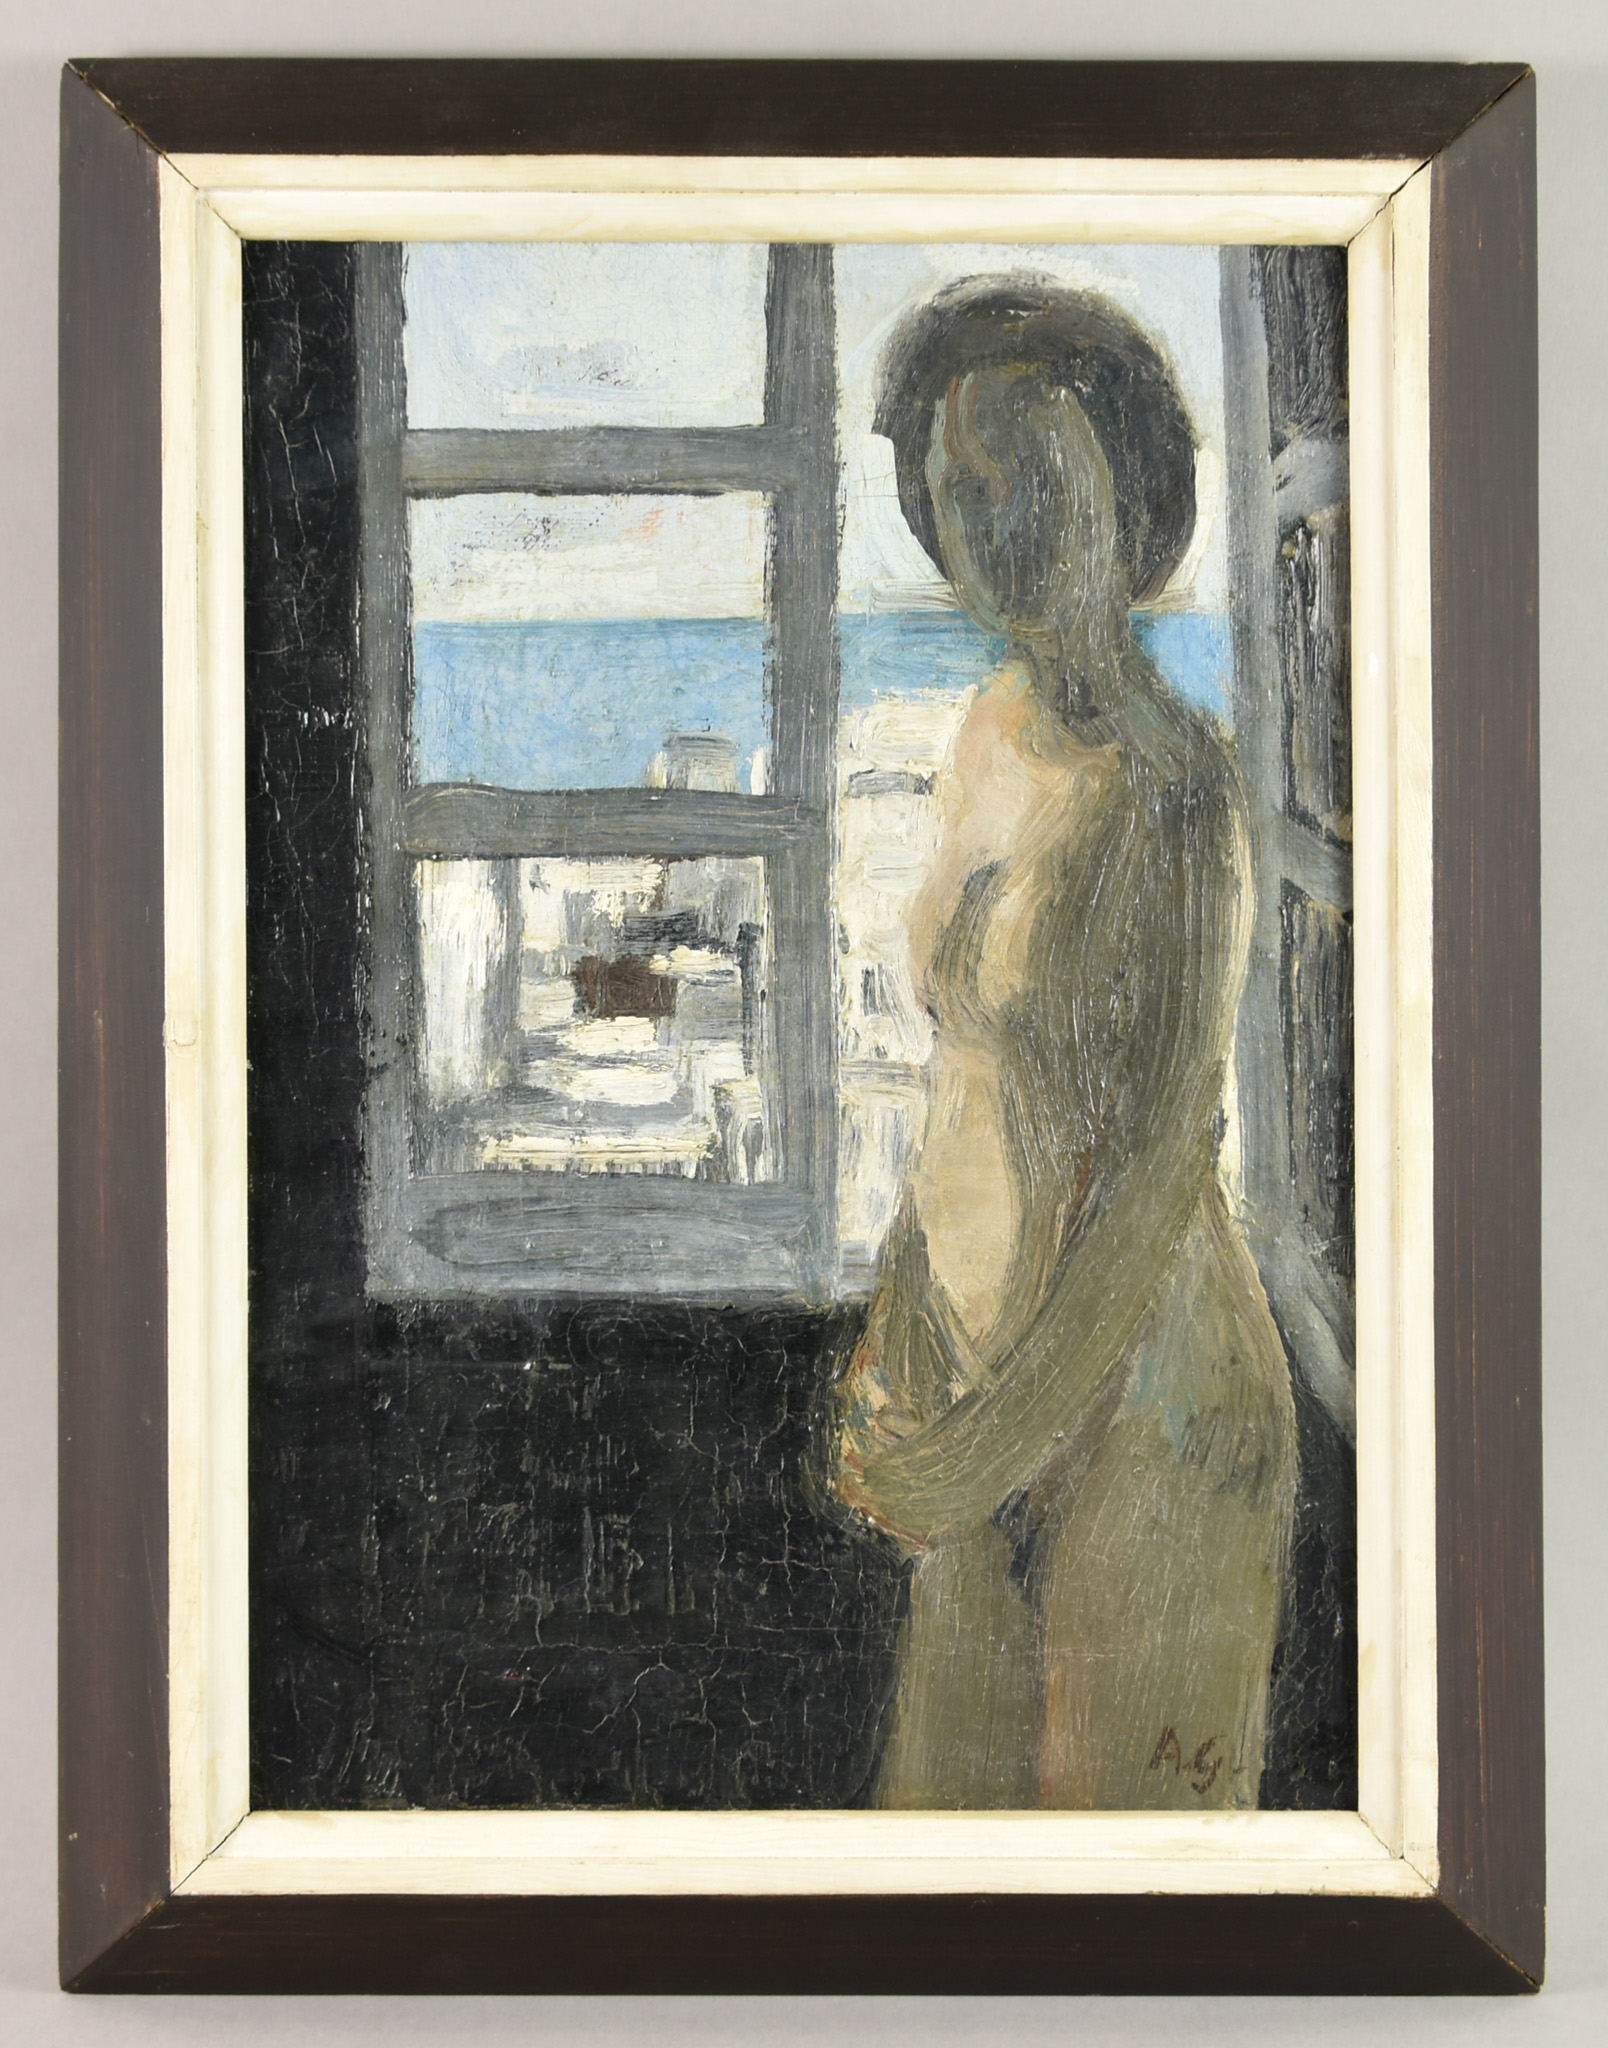 ***Alistair Grant (1925-1997) - Oil painting - "Nude and Window", monogrammed, canvas, 14ins x - Image 2 of 4